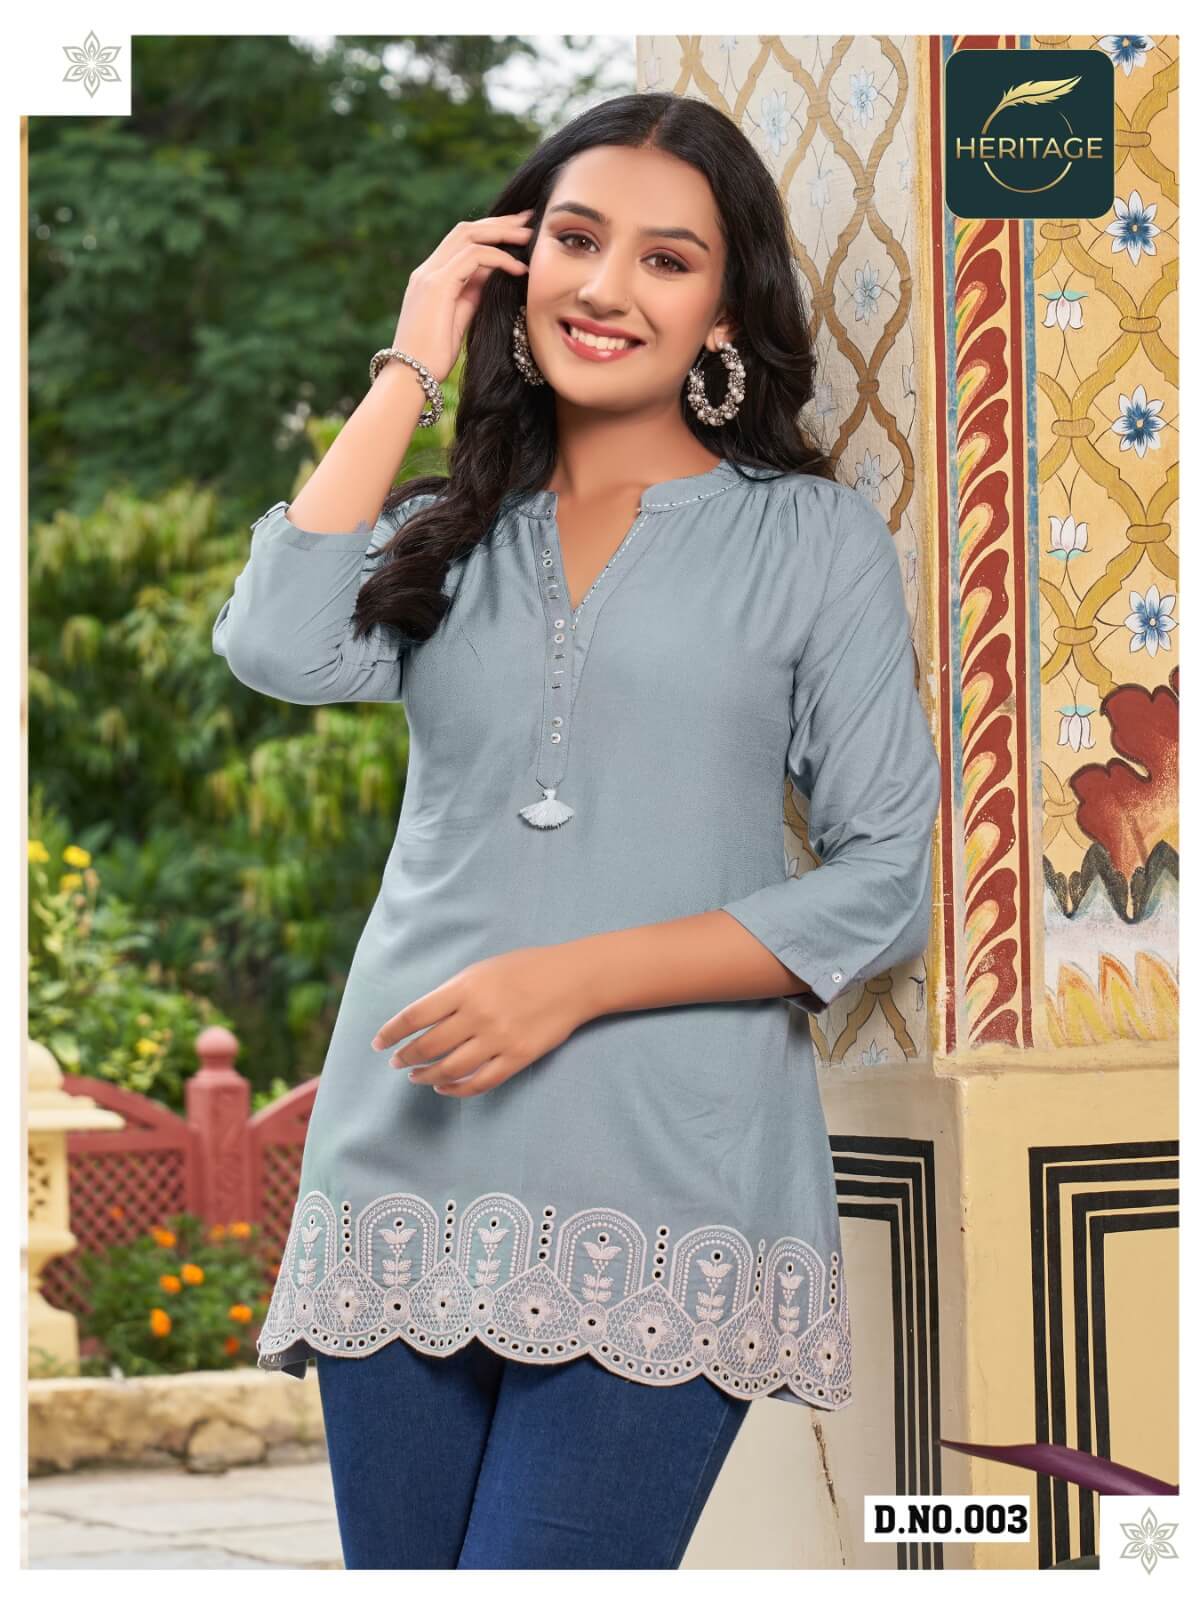 Heritage Cherry Rayon Ladies Tops Catalog collection 8